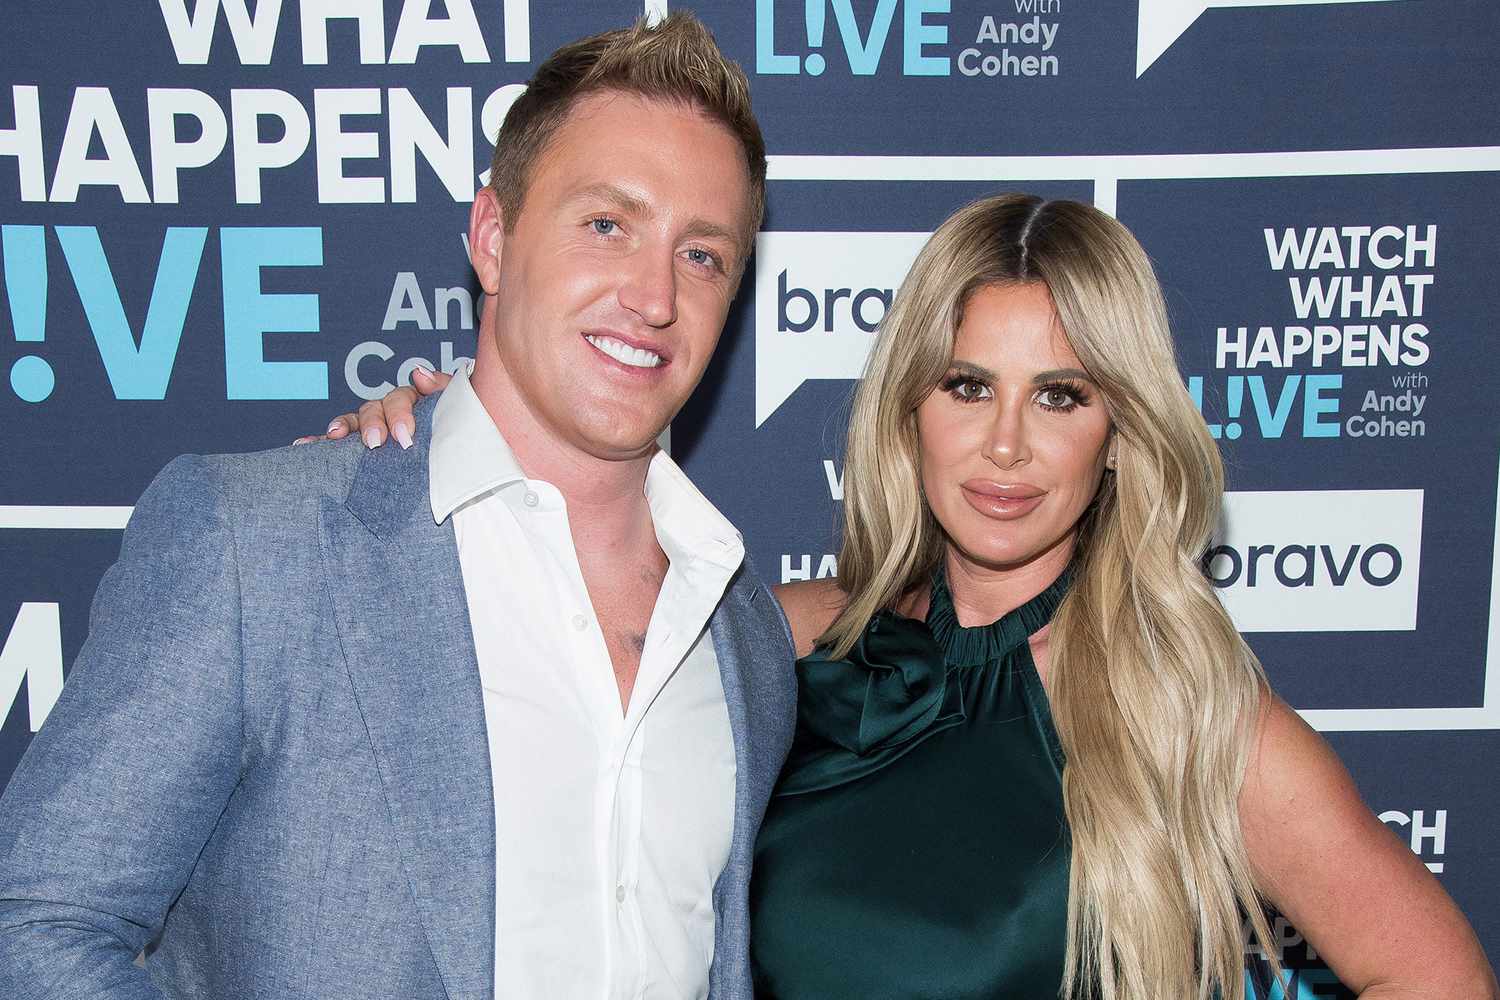 Kim Zolciak And Kroy Biermann Ordered To Mediation To Resolve Divorce Issues